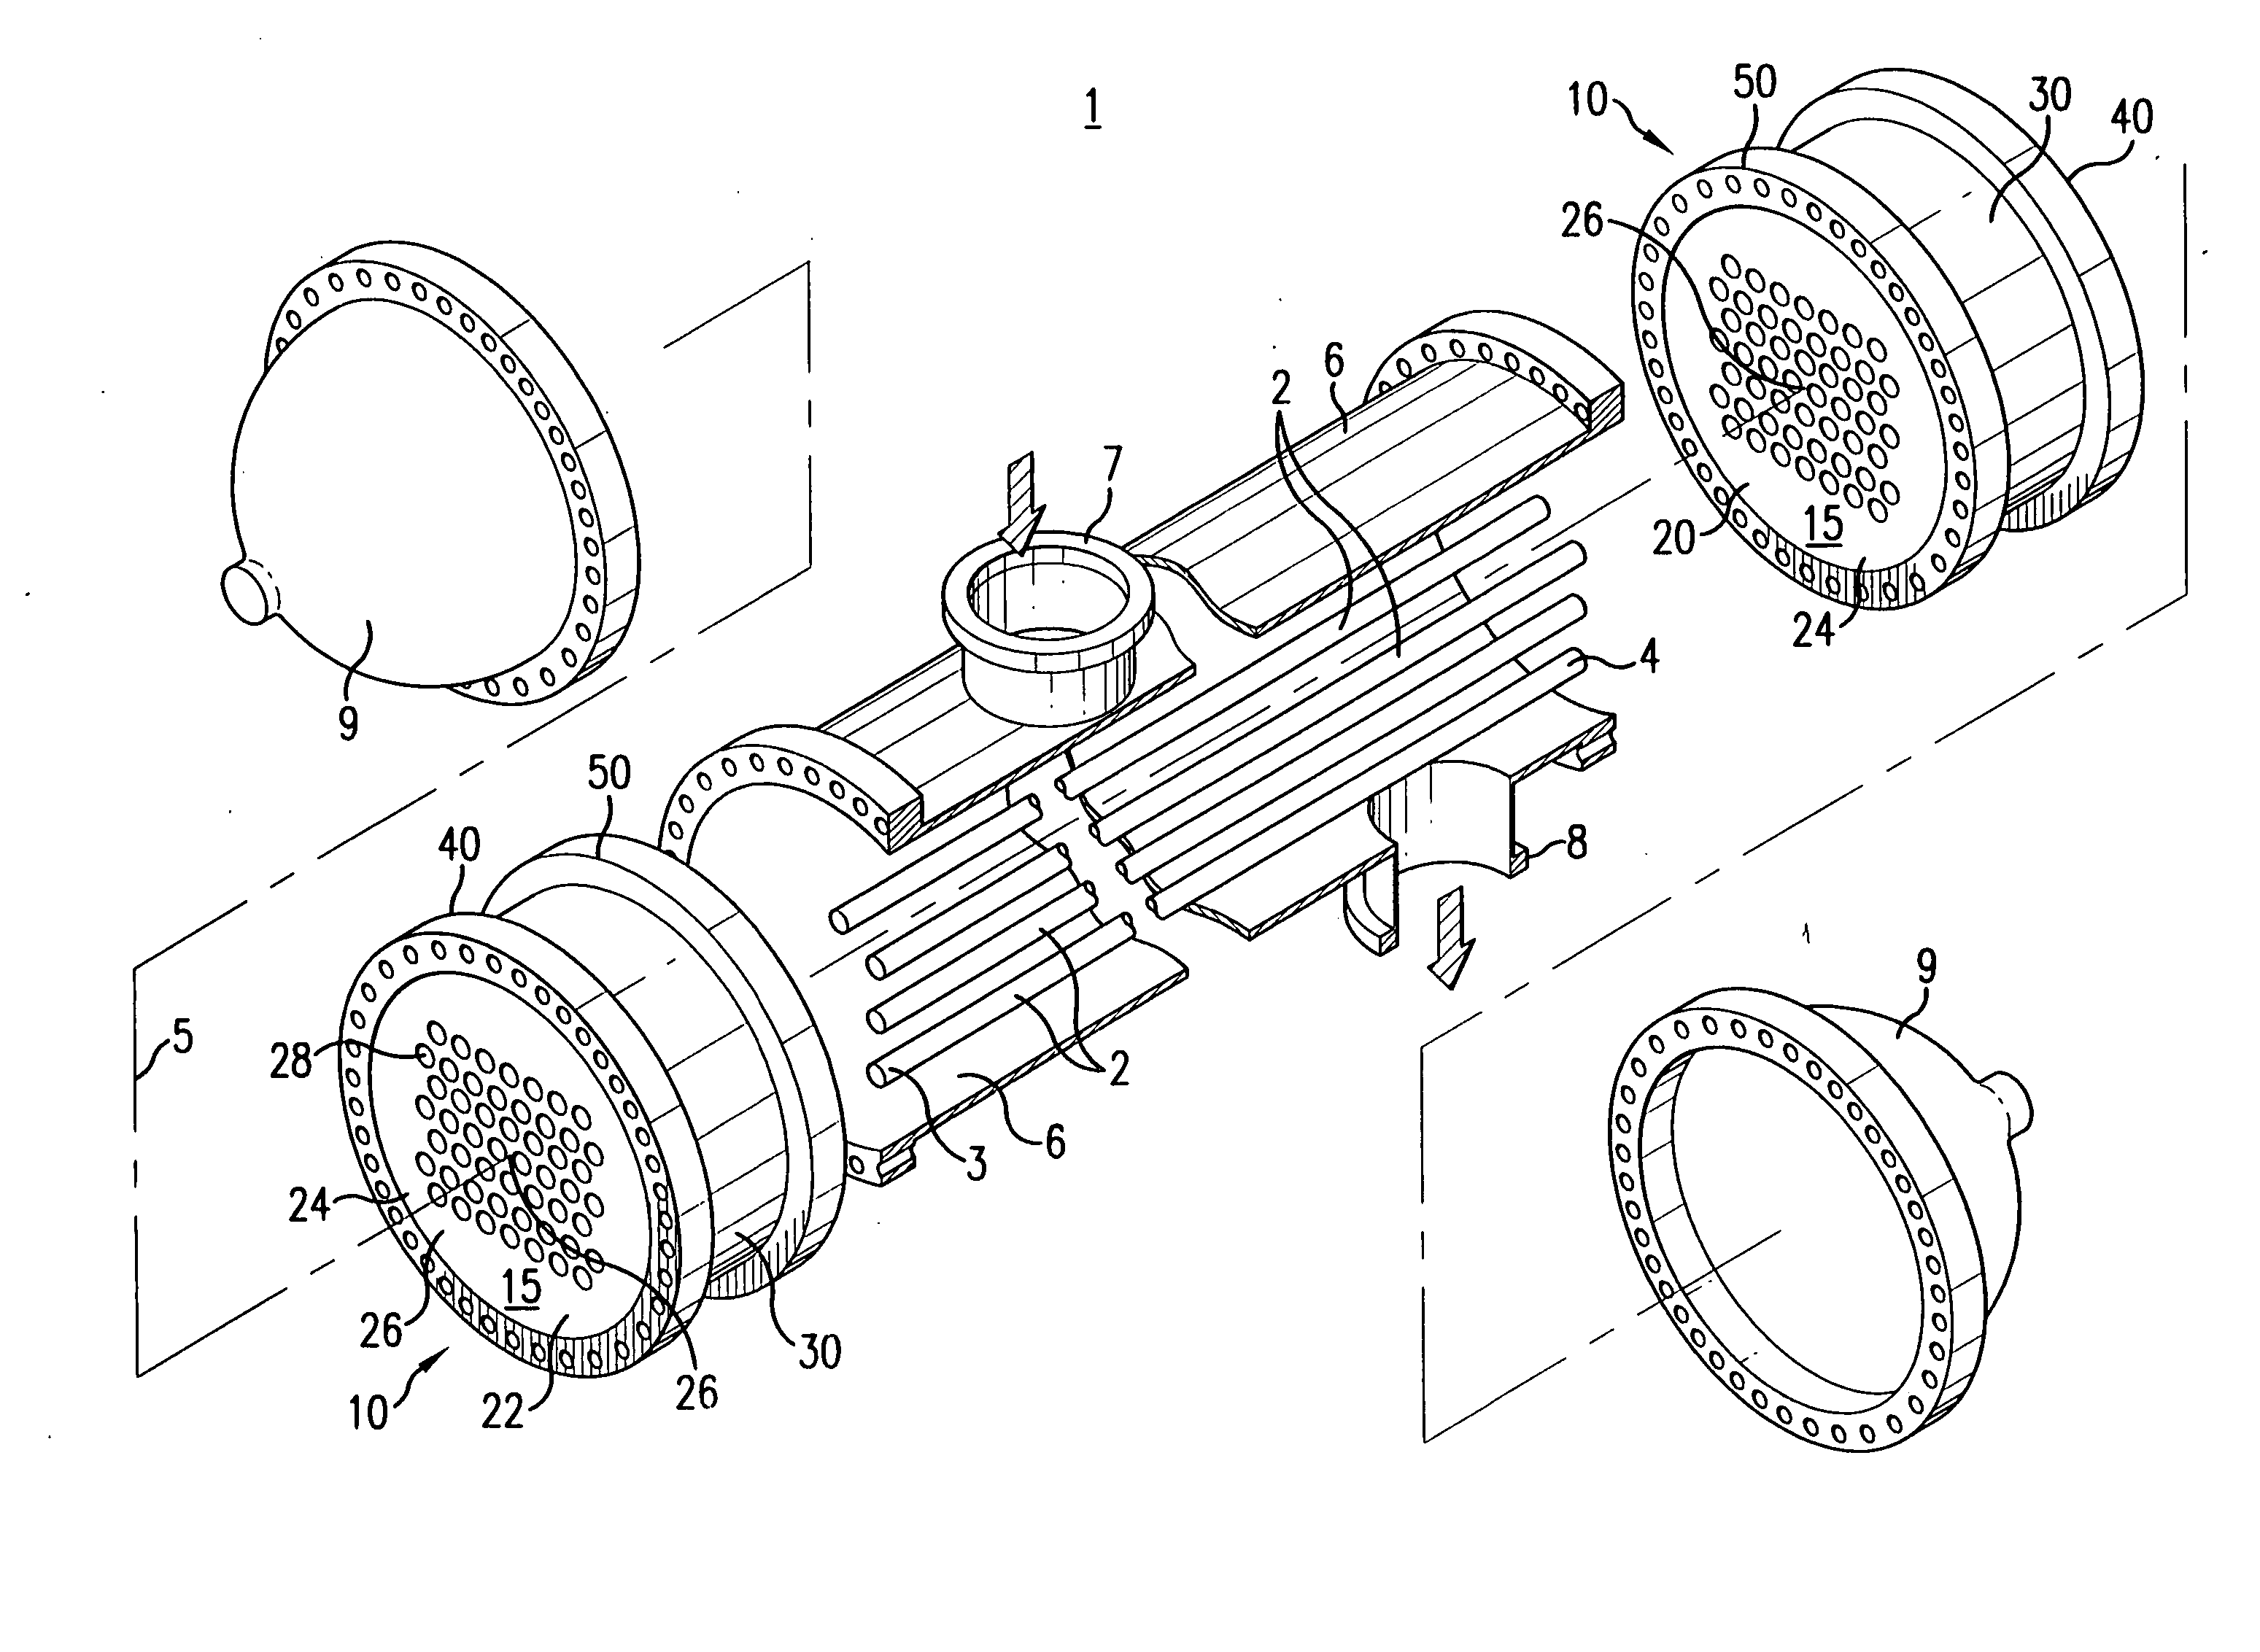 Monolithic tube sheet and method of manufacture